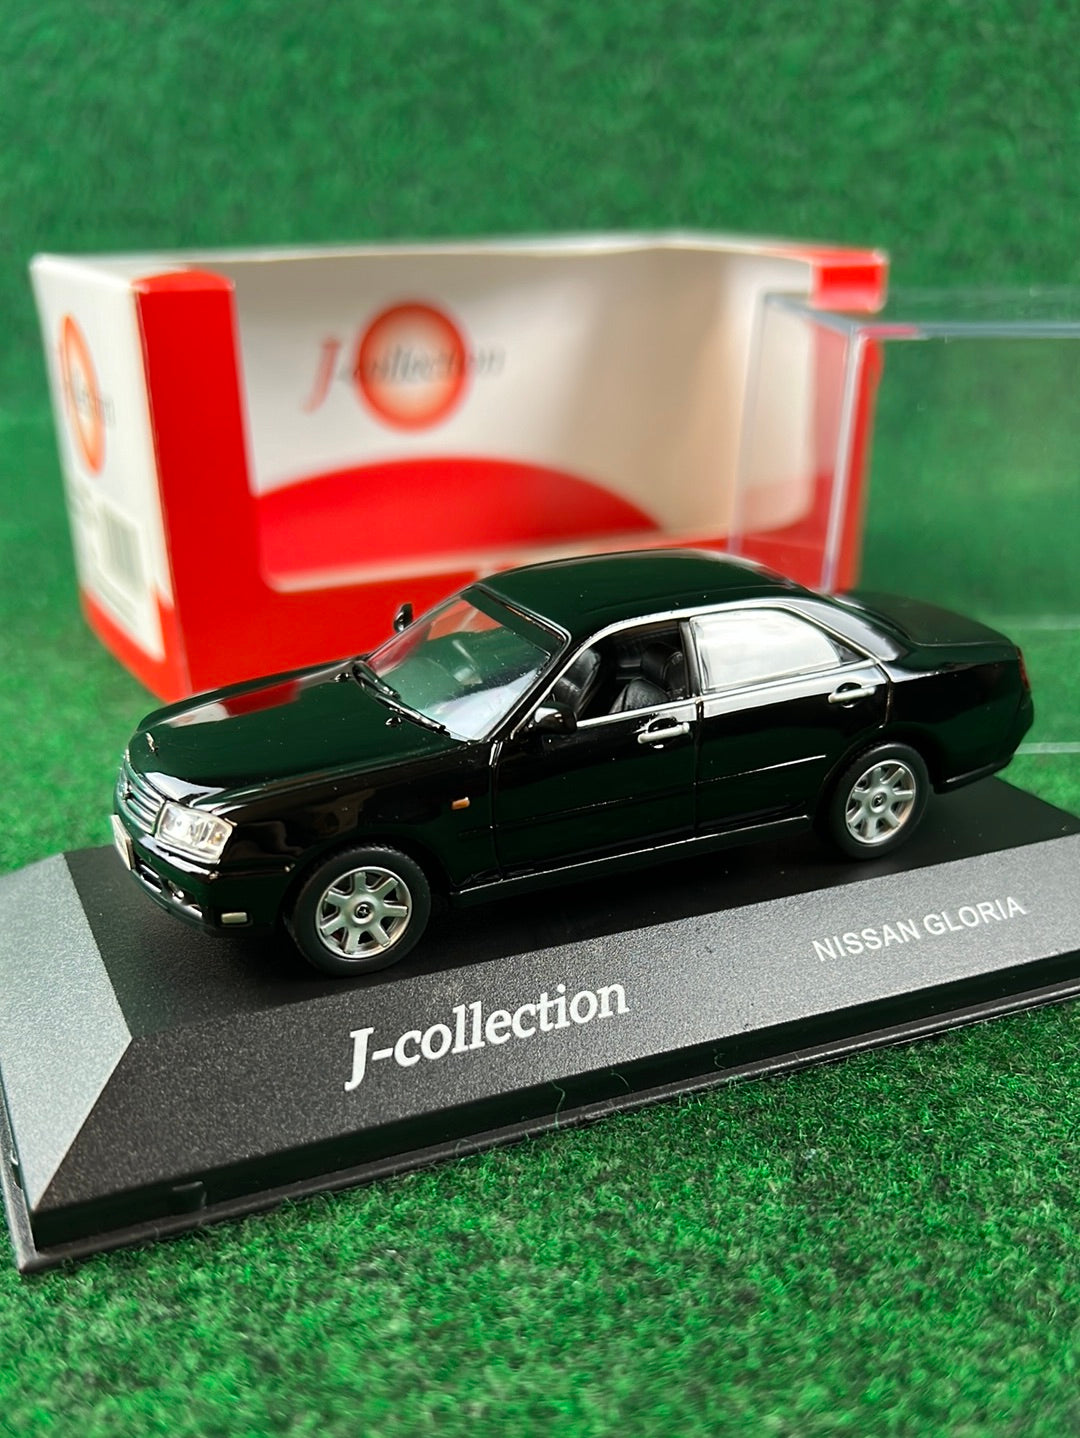 J-Collection (KYOSHO) Nissan Gloria Y34 (BLACK) 1/43 Scale Diecast